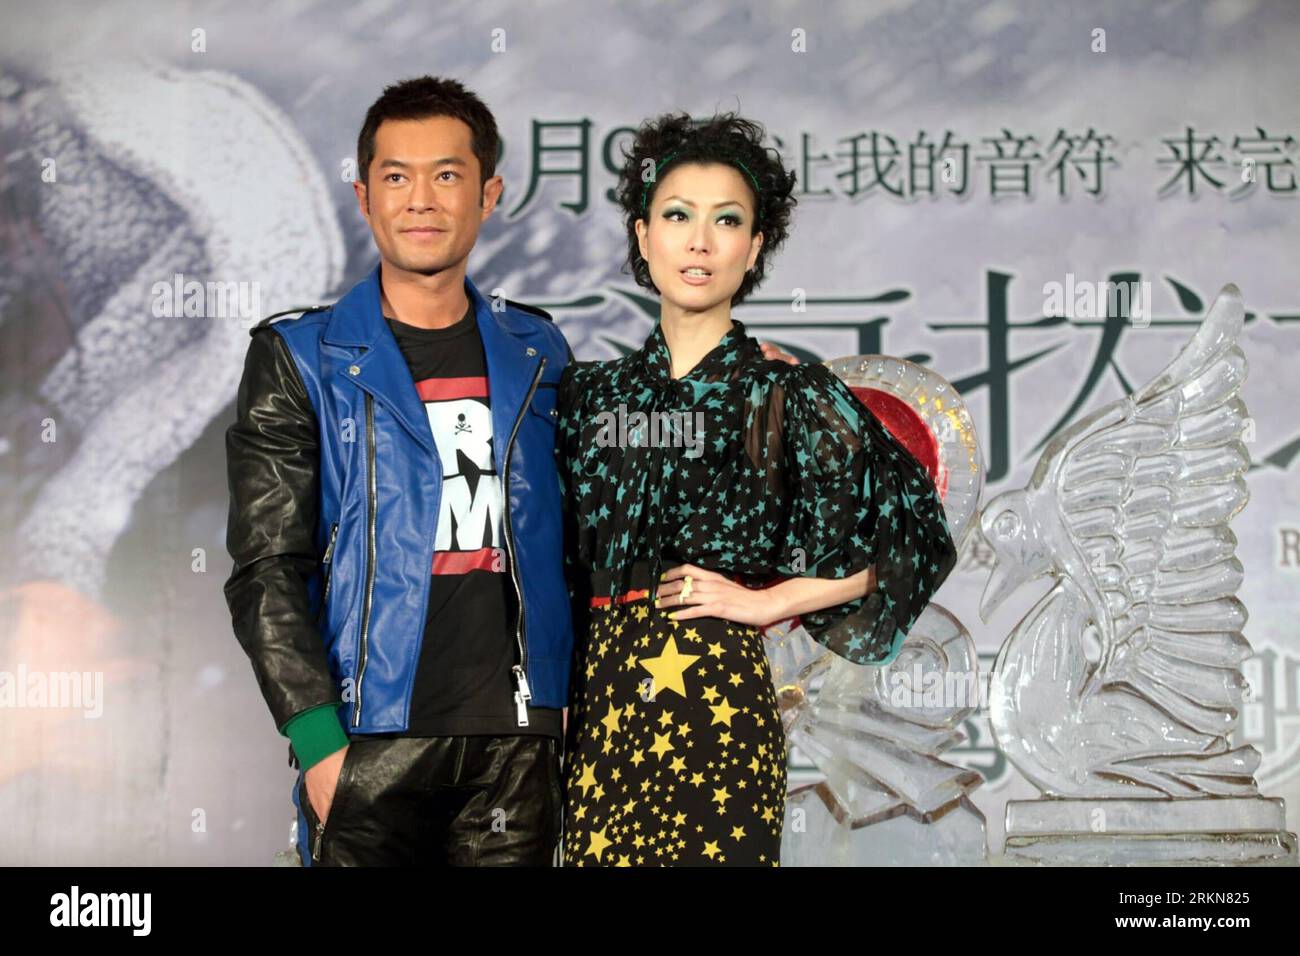 Bildnummer: 57021736  Datum: 06.02.2012  Copyright: imago/Xinhua (120206) -- SHANGHAI, Feb. 6, 2012 (Xinhua) -- Actor Louis Koo (L) and actress Sammi Cheng (R) pose for photos during a press conference of the film Romancing In Thin Air , in which they star, in east China s Shanghai Municipality, Feb. 6, 2012. Directed by Hong Kong-based Johnnie To, the film romance will be premiered in the Chinese mainland on Feb. 9 in the final run-up to the Valentine s Day. (Xinhua) (lmm) CHINA-SHANGHAI-LOUIS KOO-SAMMI CHENG-NEW FILM-PRESS CONFERENCE (CN) PUBLICATIONxNOTxINxCHN People Entertainment Film xda Stock Photo